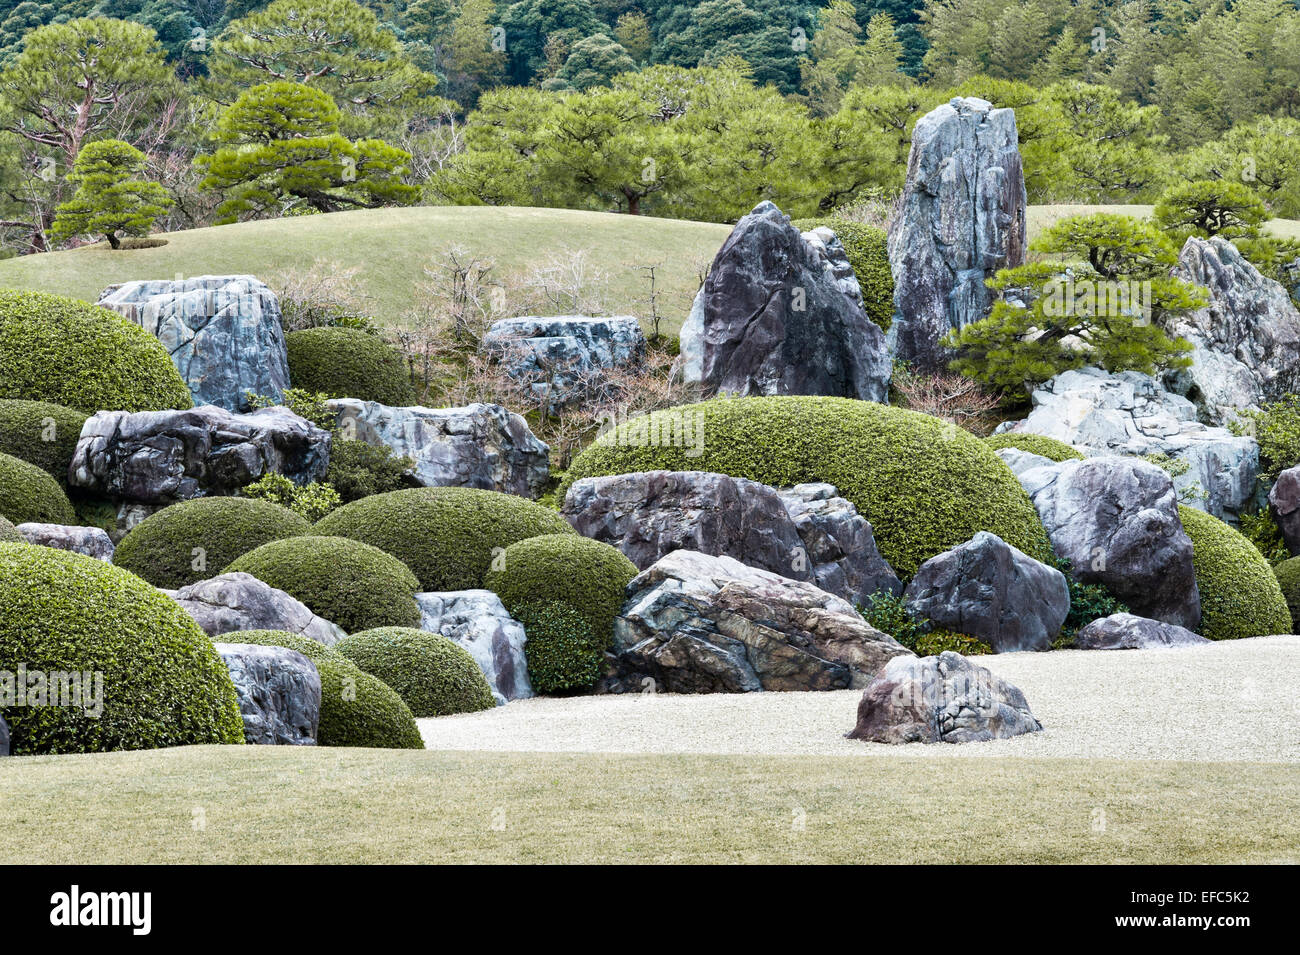 Matsue, Honshu, Japan. The Dry Landscape Garden (kare-sansui ) in the famous 20c gardens of the Adachi Museum of Art Stock Photo